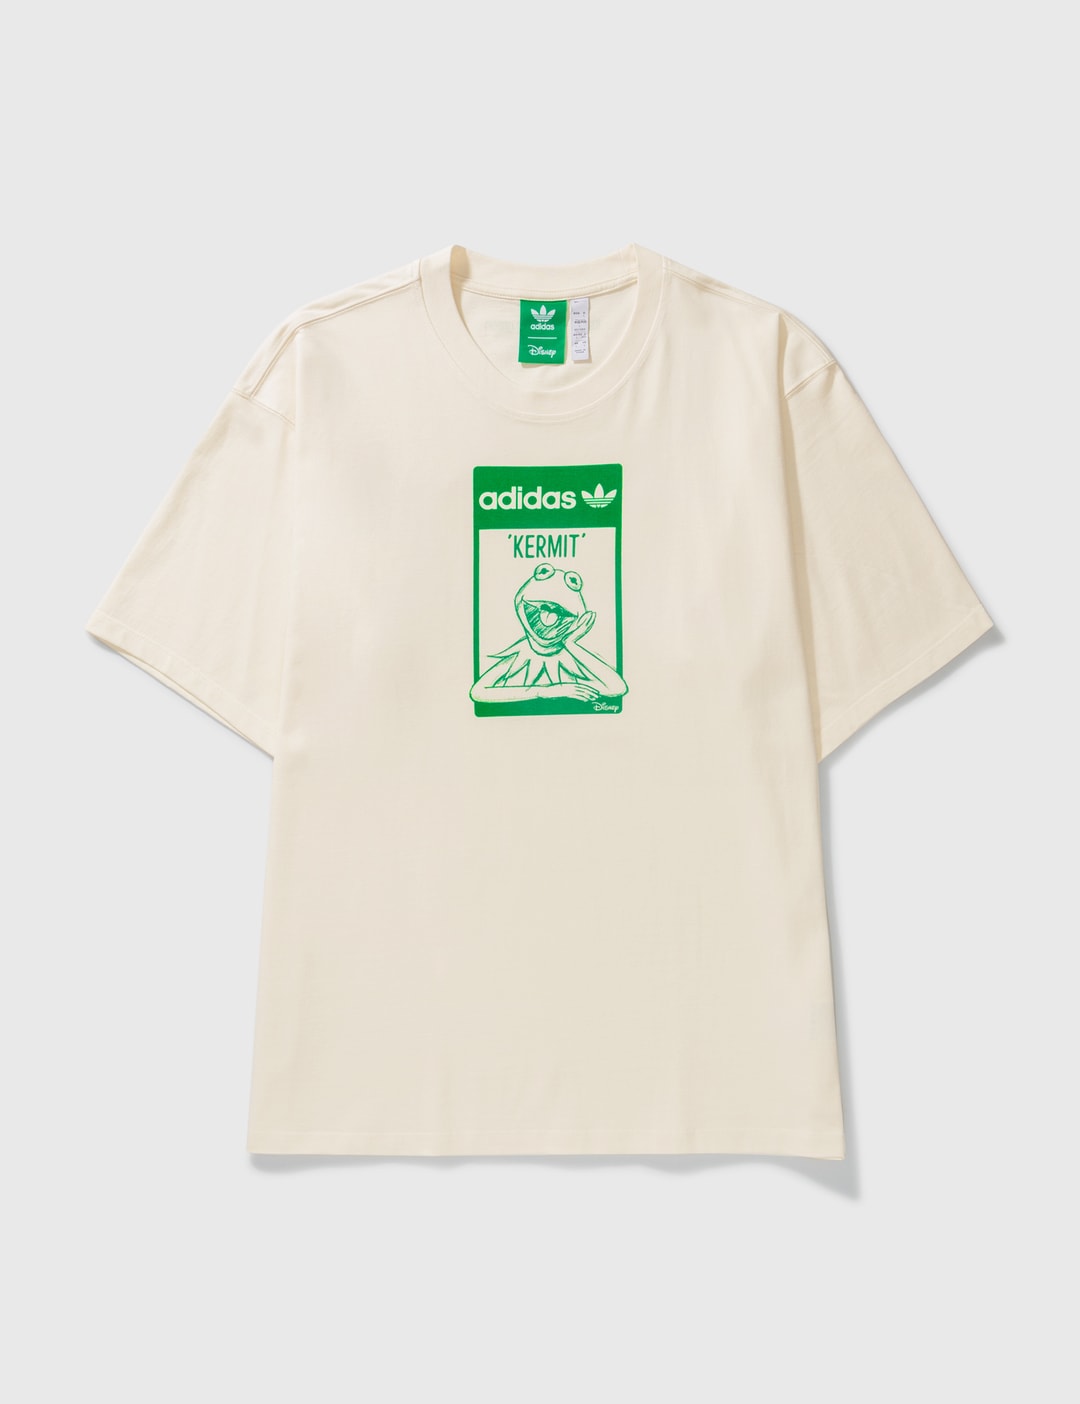 ui cassette zondag Adidas Originals - Disney Kermit T-shirt | HBX - Globally Curated Fashion  and Lifestyle by Hypebeast